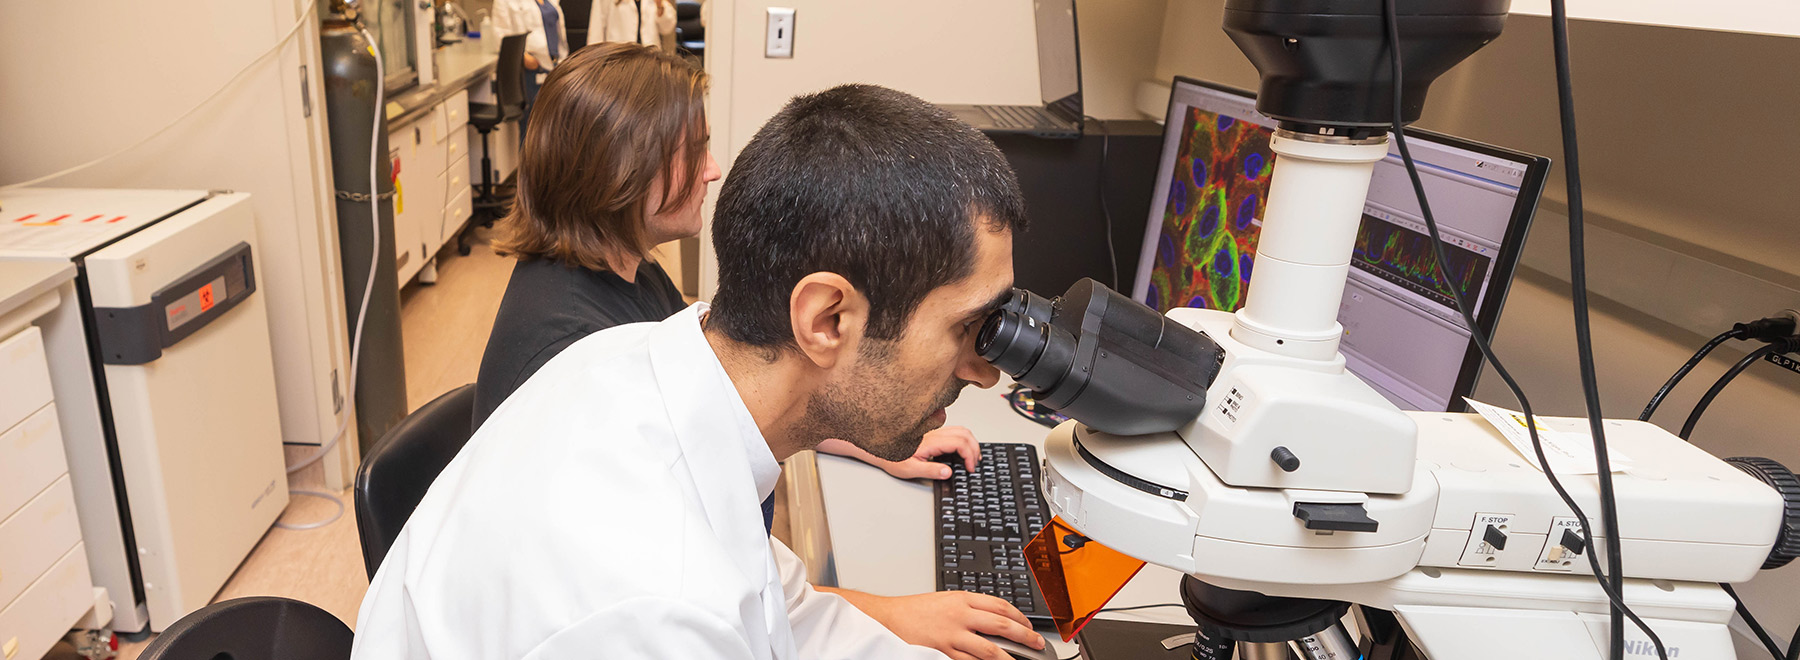 One researcher looks through a microscope as another in the background reviews data on a computer monitor.